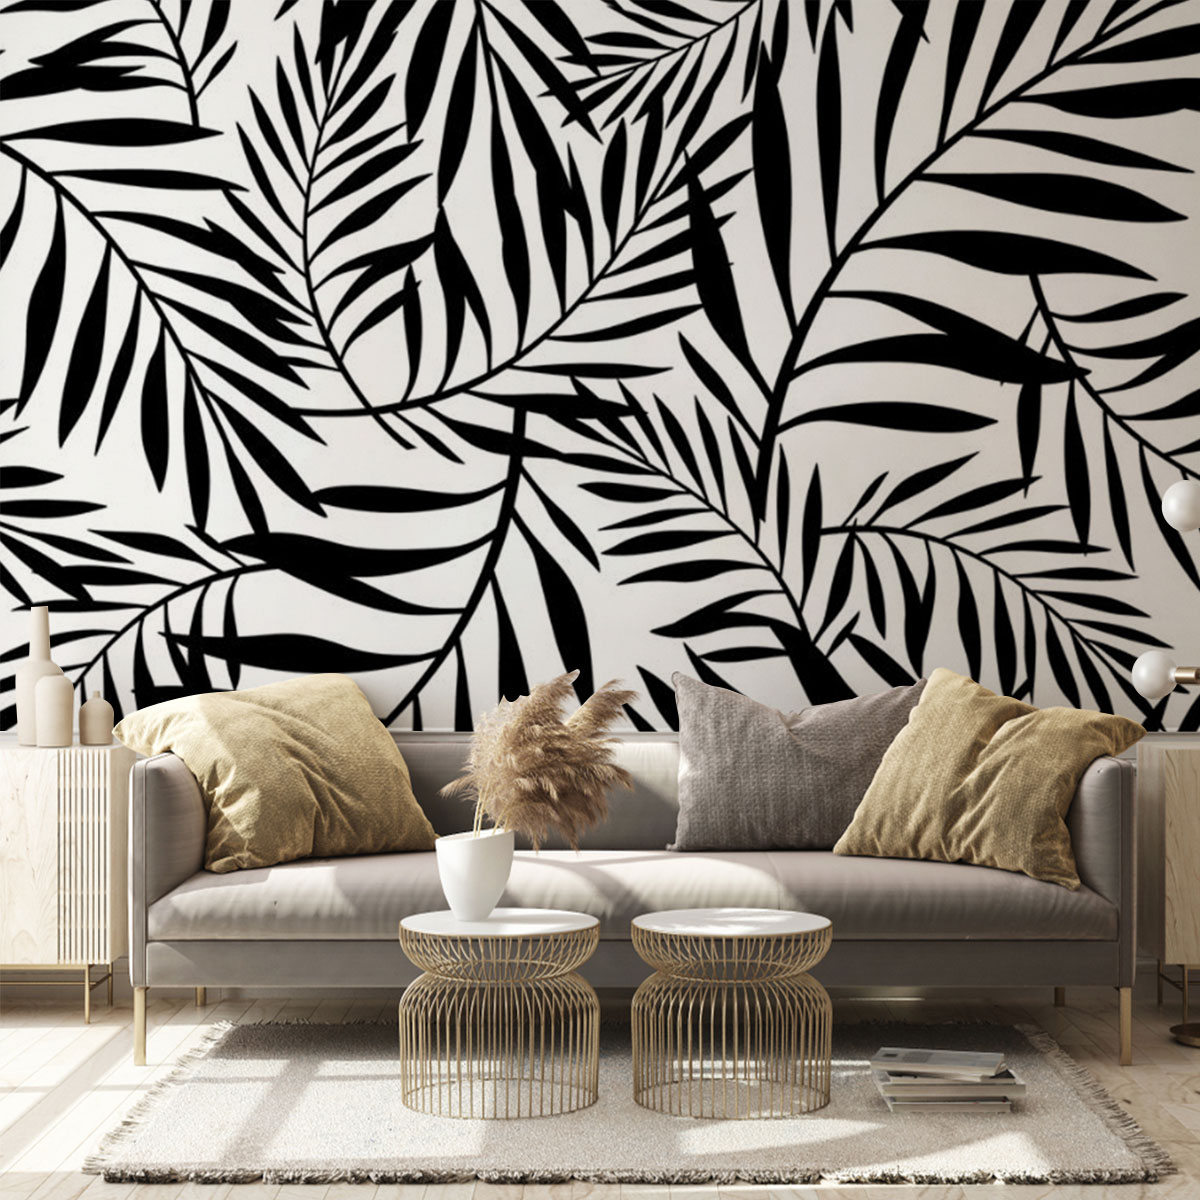 Black And White With Palm Leaves Wall Mural